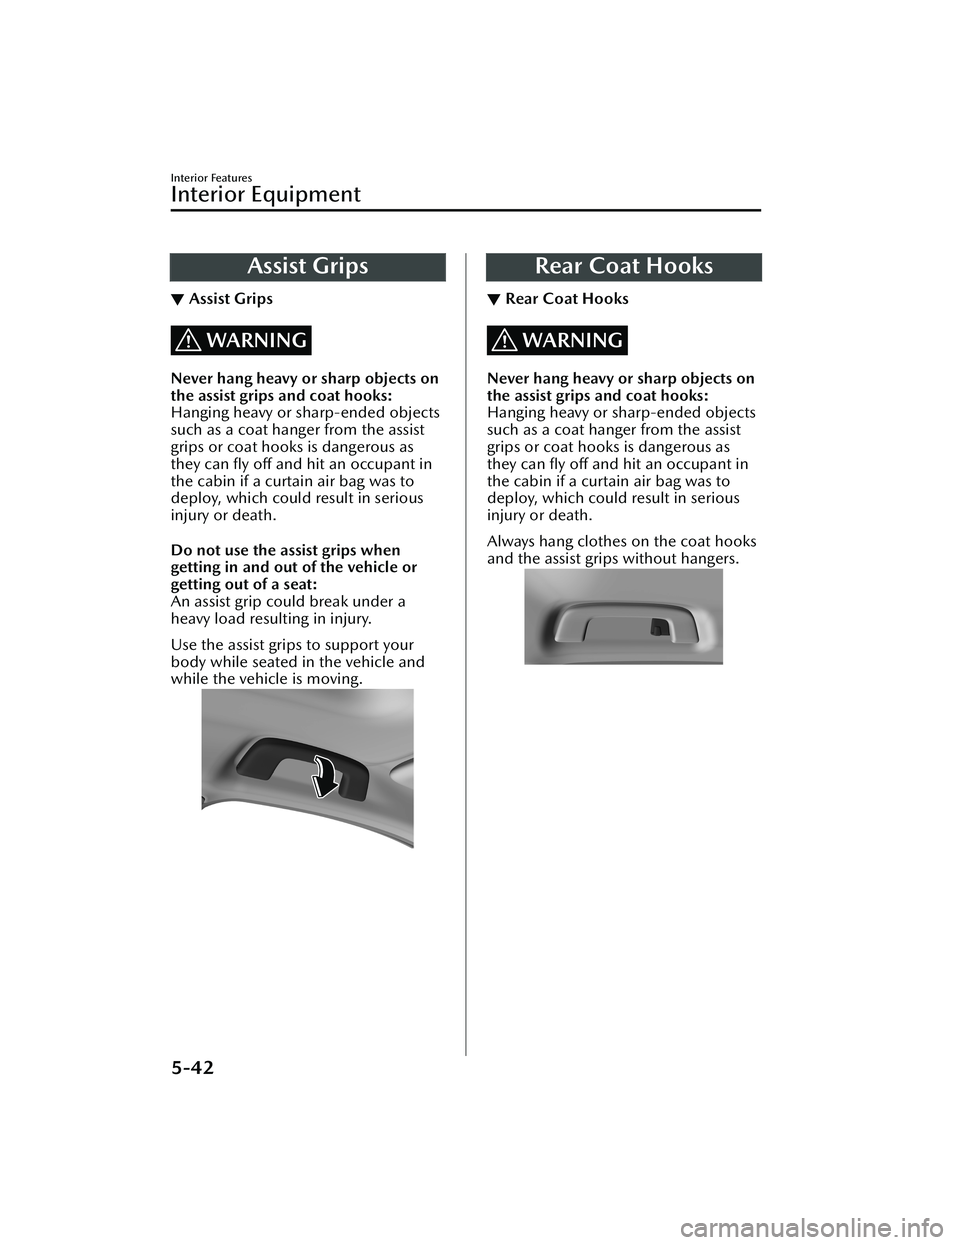 MAZDA MODEL CX-30 2021  Owners Manual Assist Grips
▼Assist Grips
WARNING
Never hang heavy or sharp objects on
the assist grips and coat hooks:
Hanging heavy or sharp-ended objects
such as a coat hanger from the assist
grips or coat hook